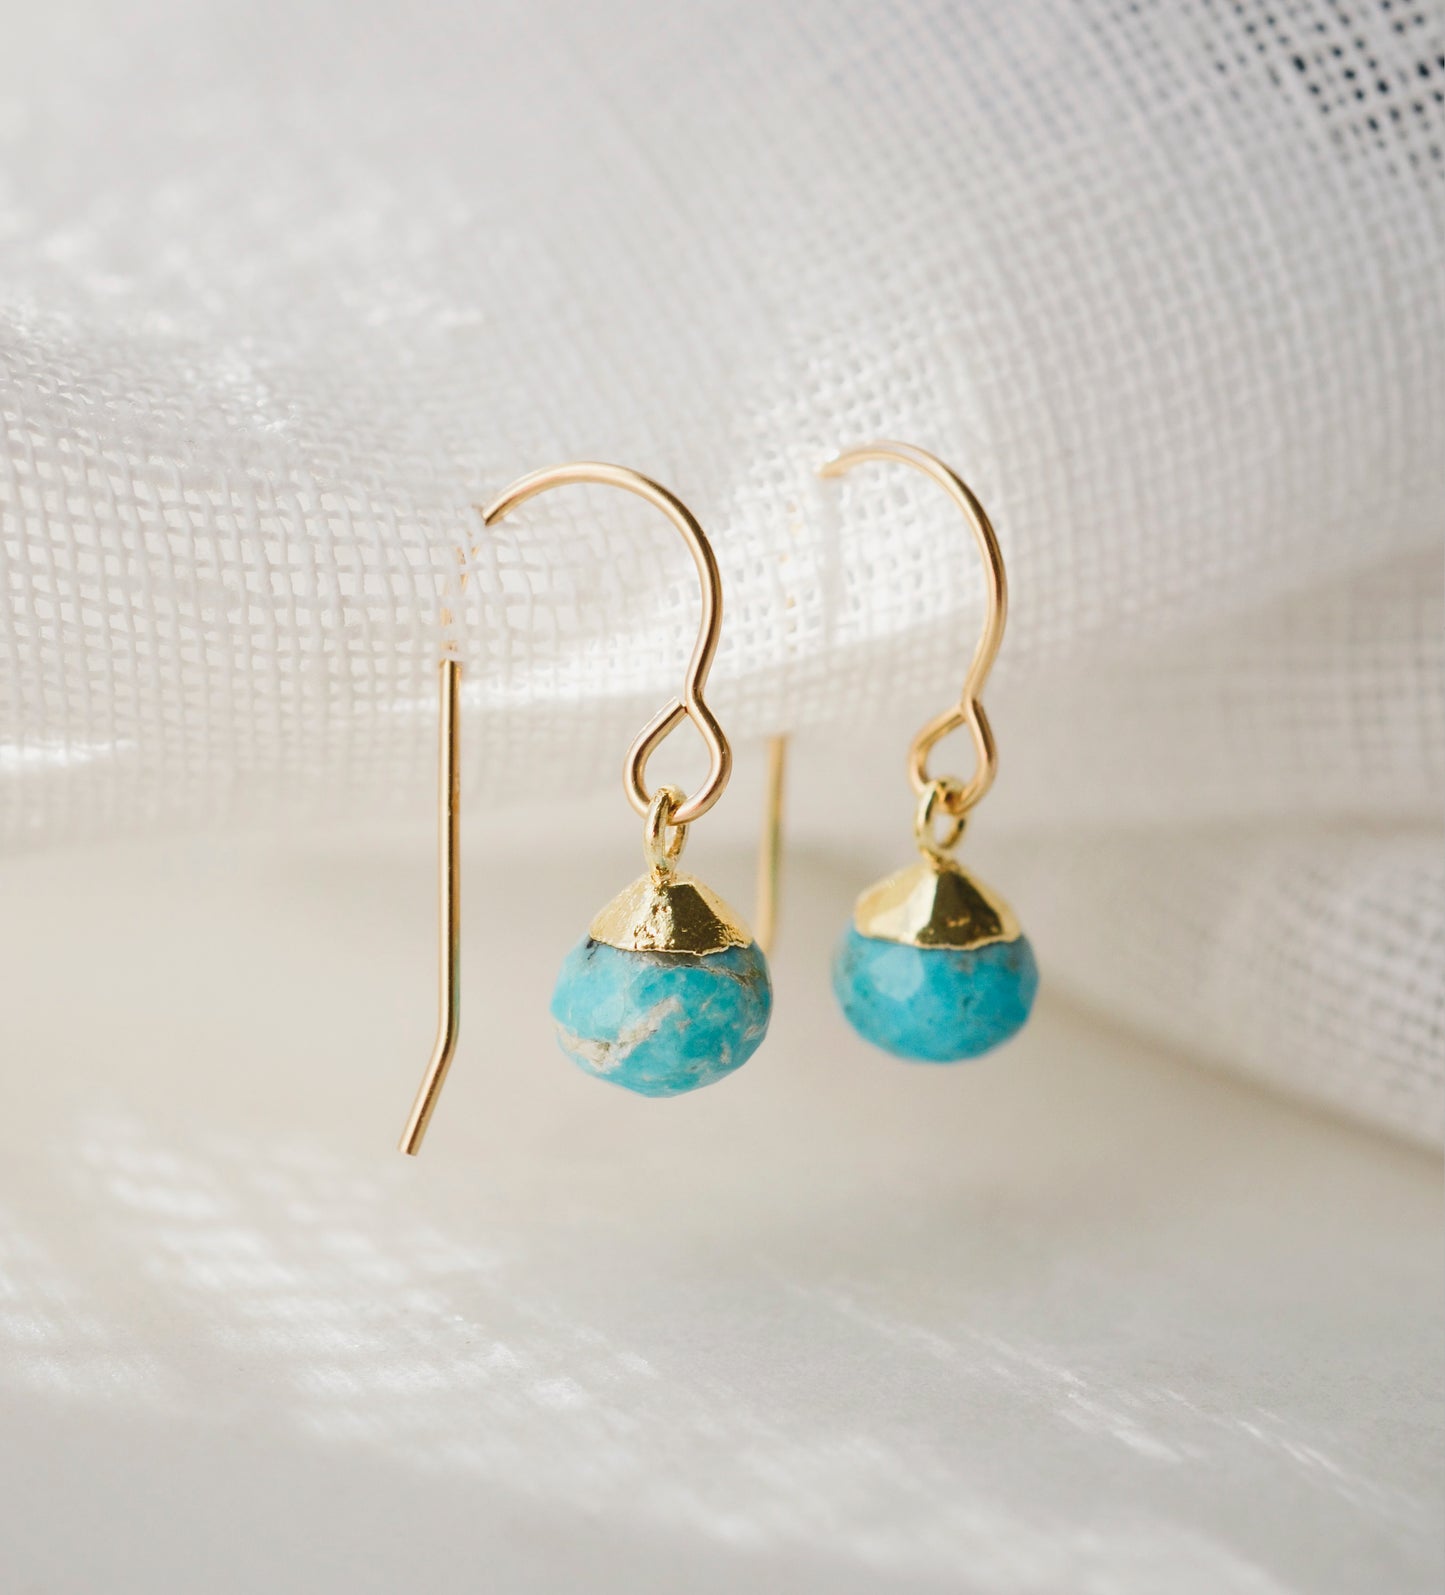 Small round turquoise faceted drops suspended from gold filled earwires. Each stone has a different matrix with light to dark brown coloring.